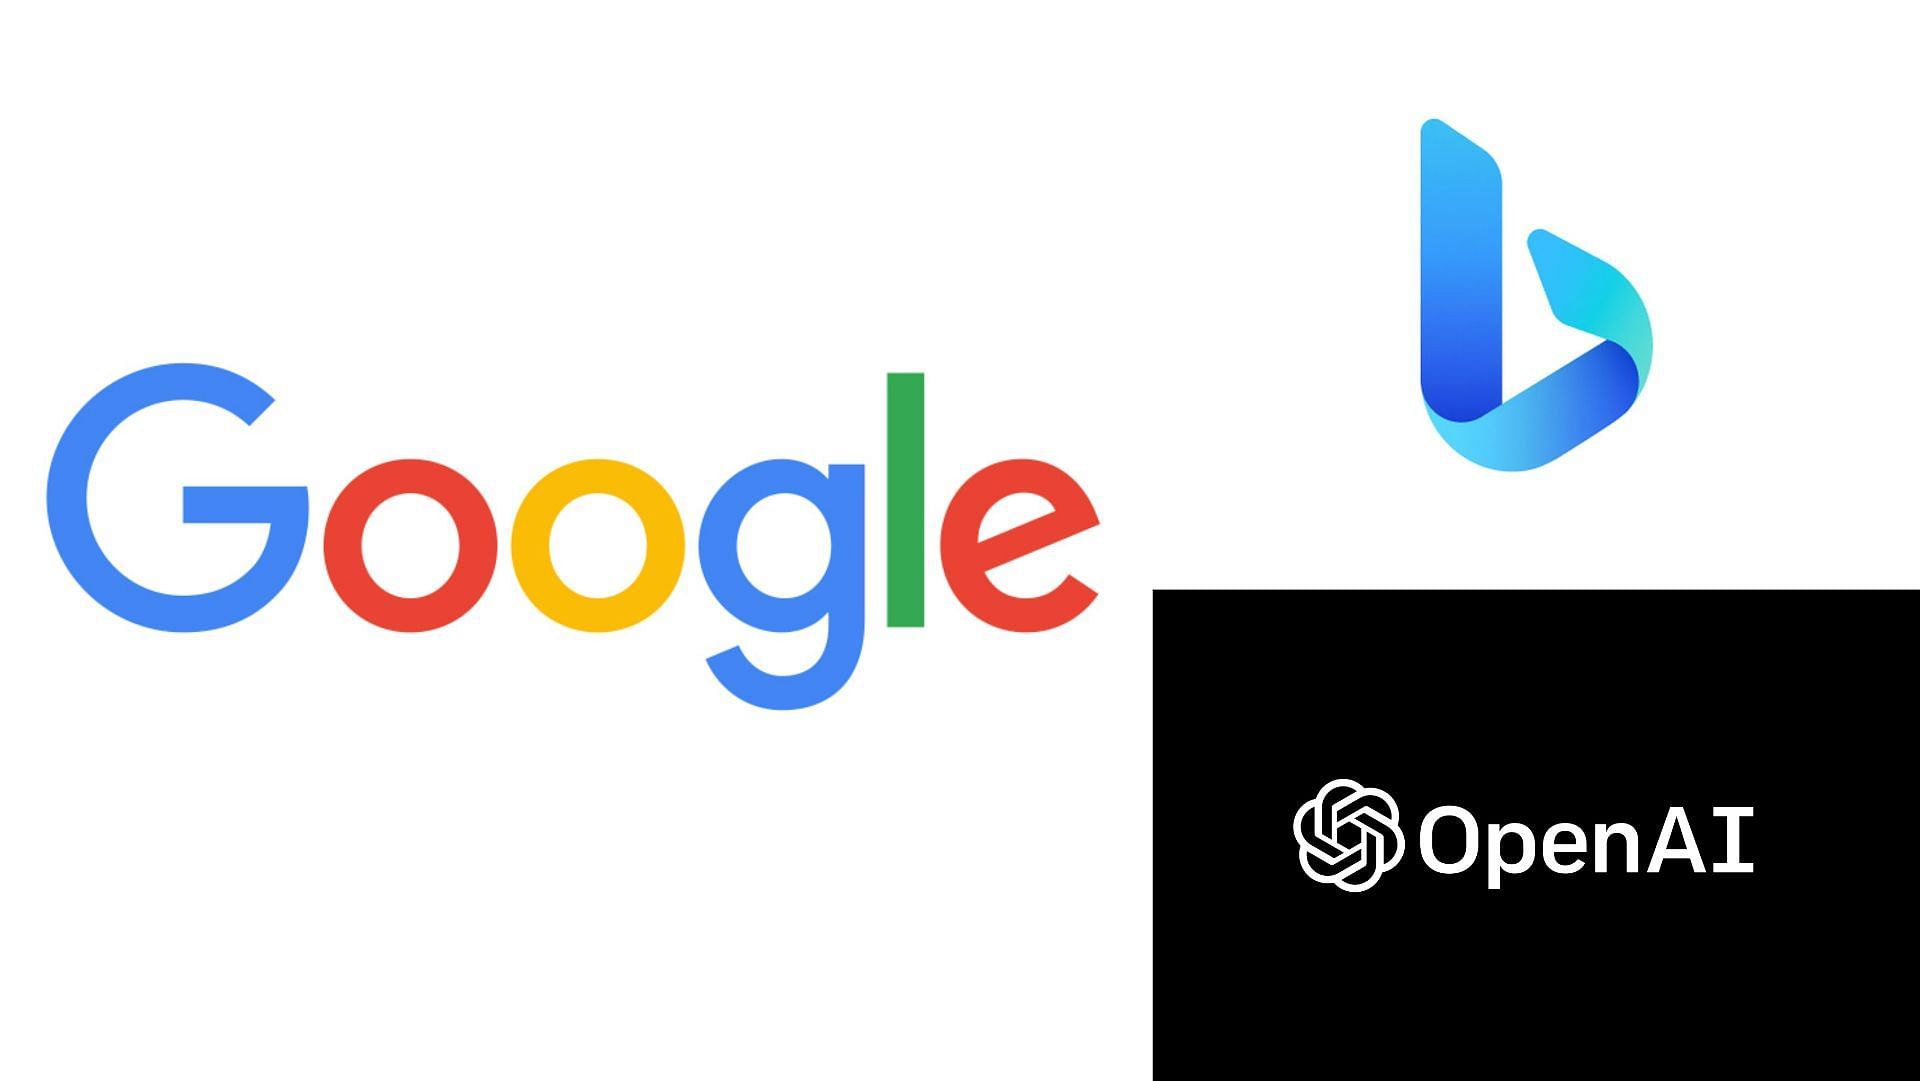 Can ChatGPT replace Google search with help from Microsoft? (image by Google, Microsoft and OpenAI)